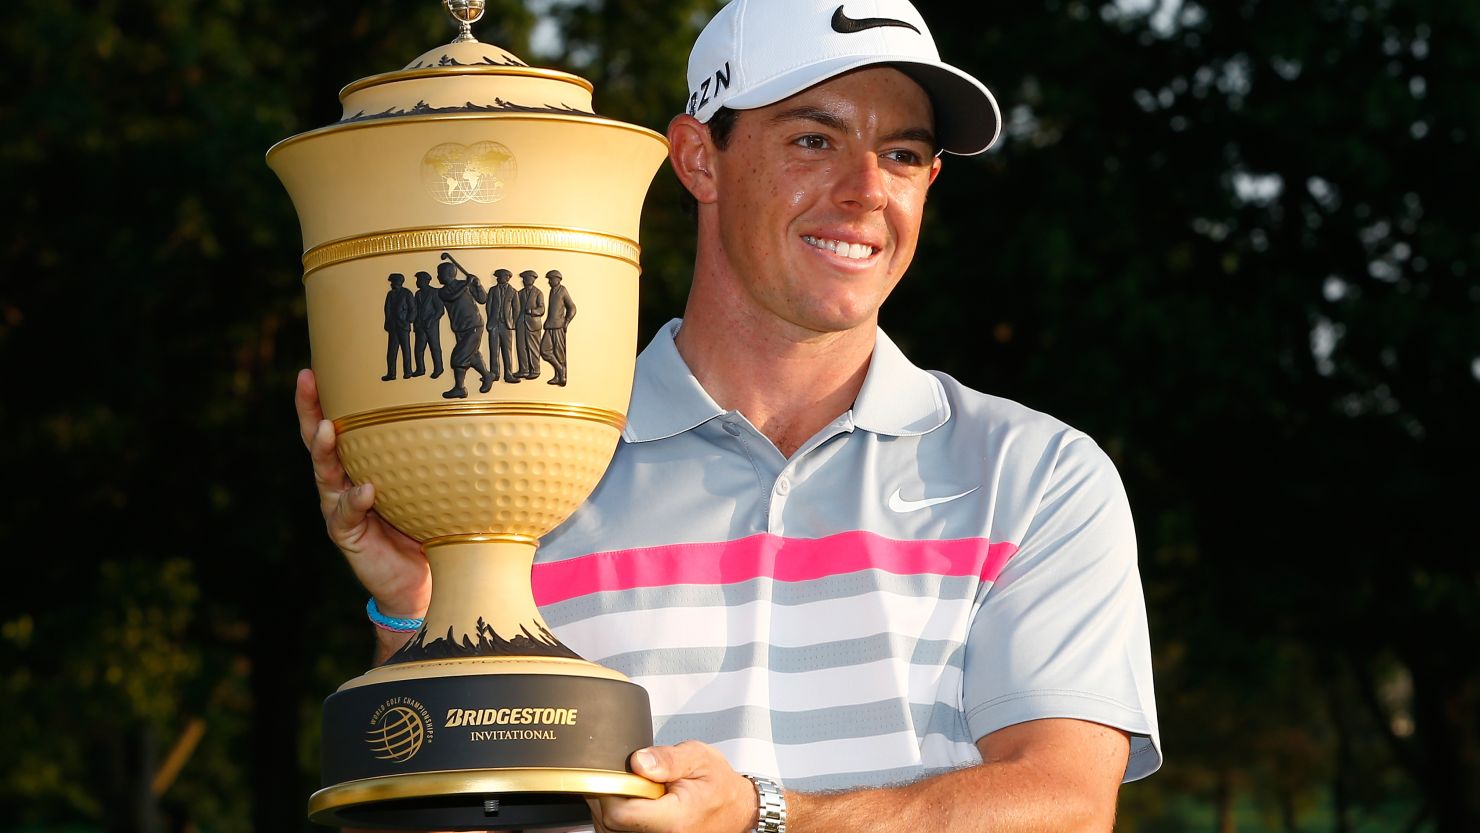 Rory McIlroy will attempt to win the fourth major of his career at the Valhalla Golf Club.